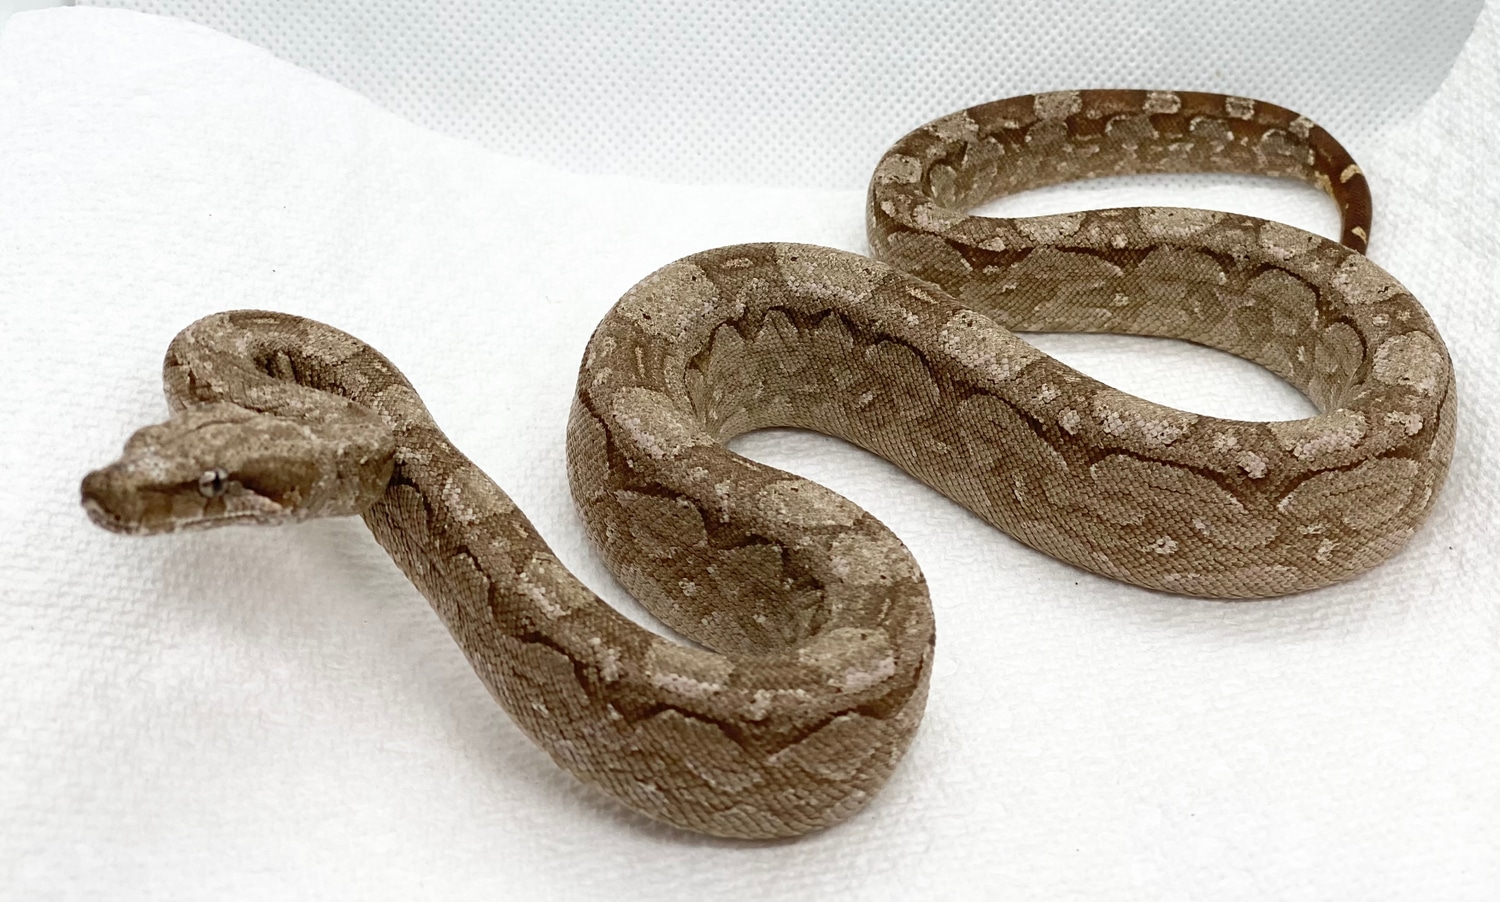 T+ Argentine Boa Boa Constrictor by Eisel Reptiles